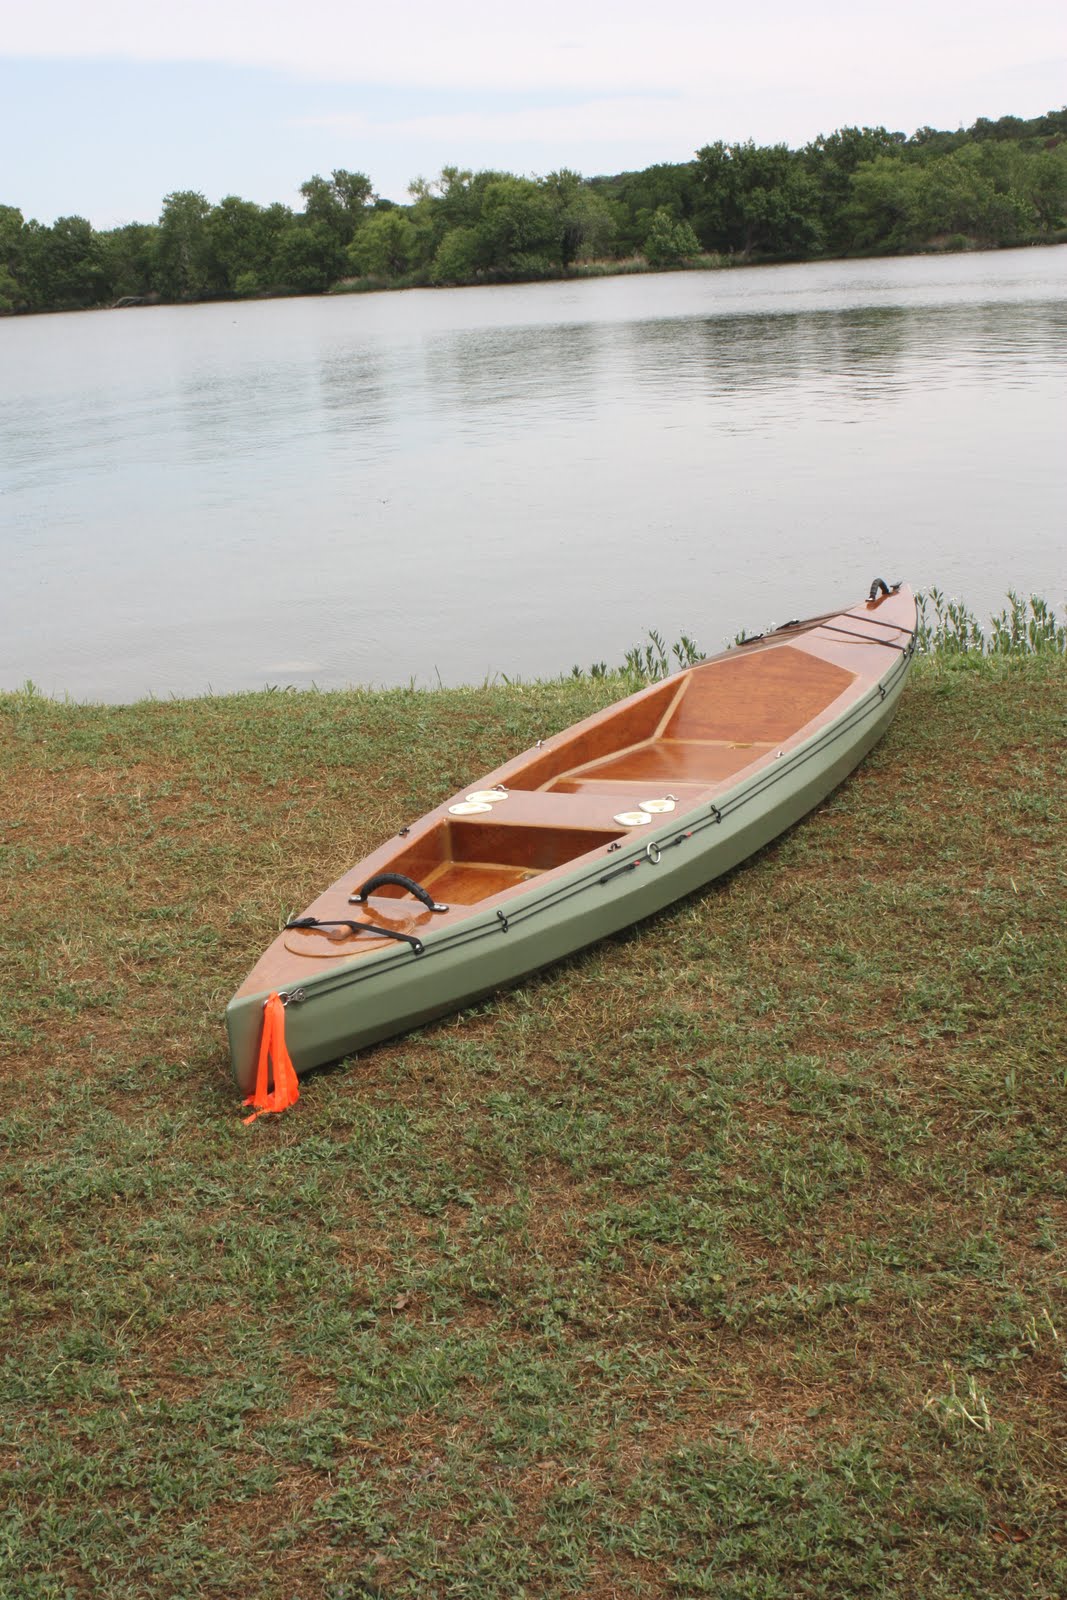 Wild Ed's Texas Outdoors: The 3 Panel Boat, Canoe or Pirogue